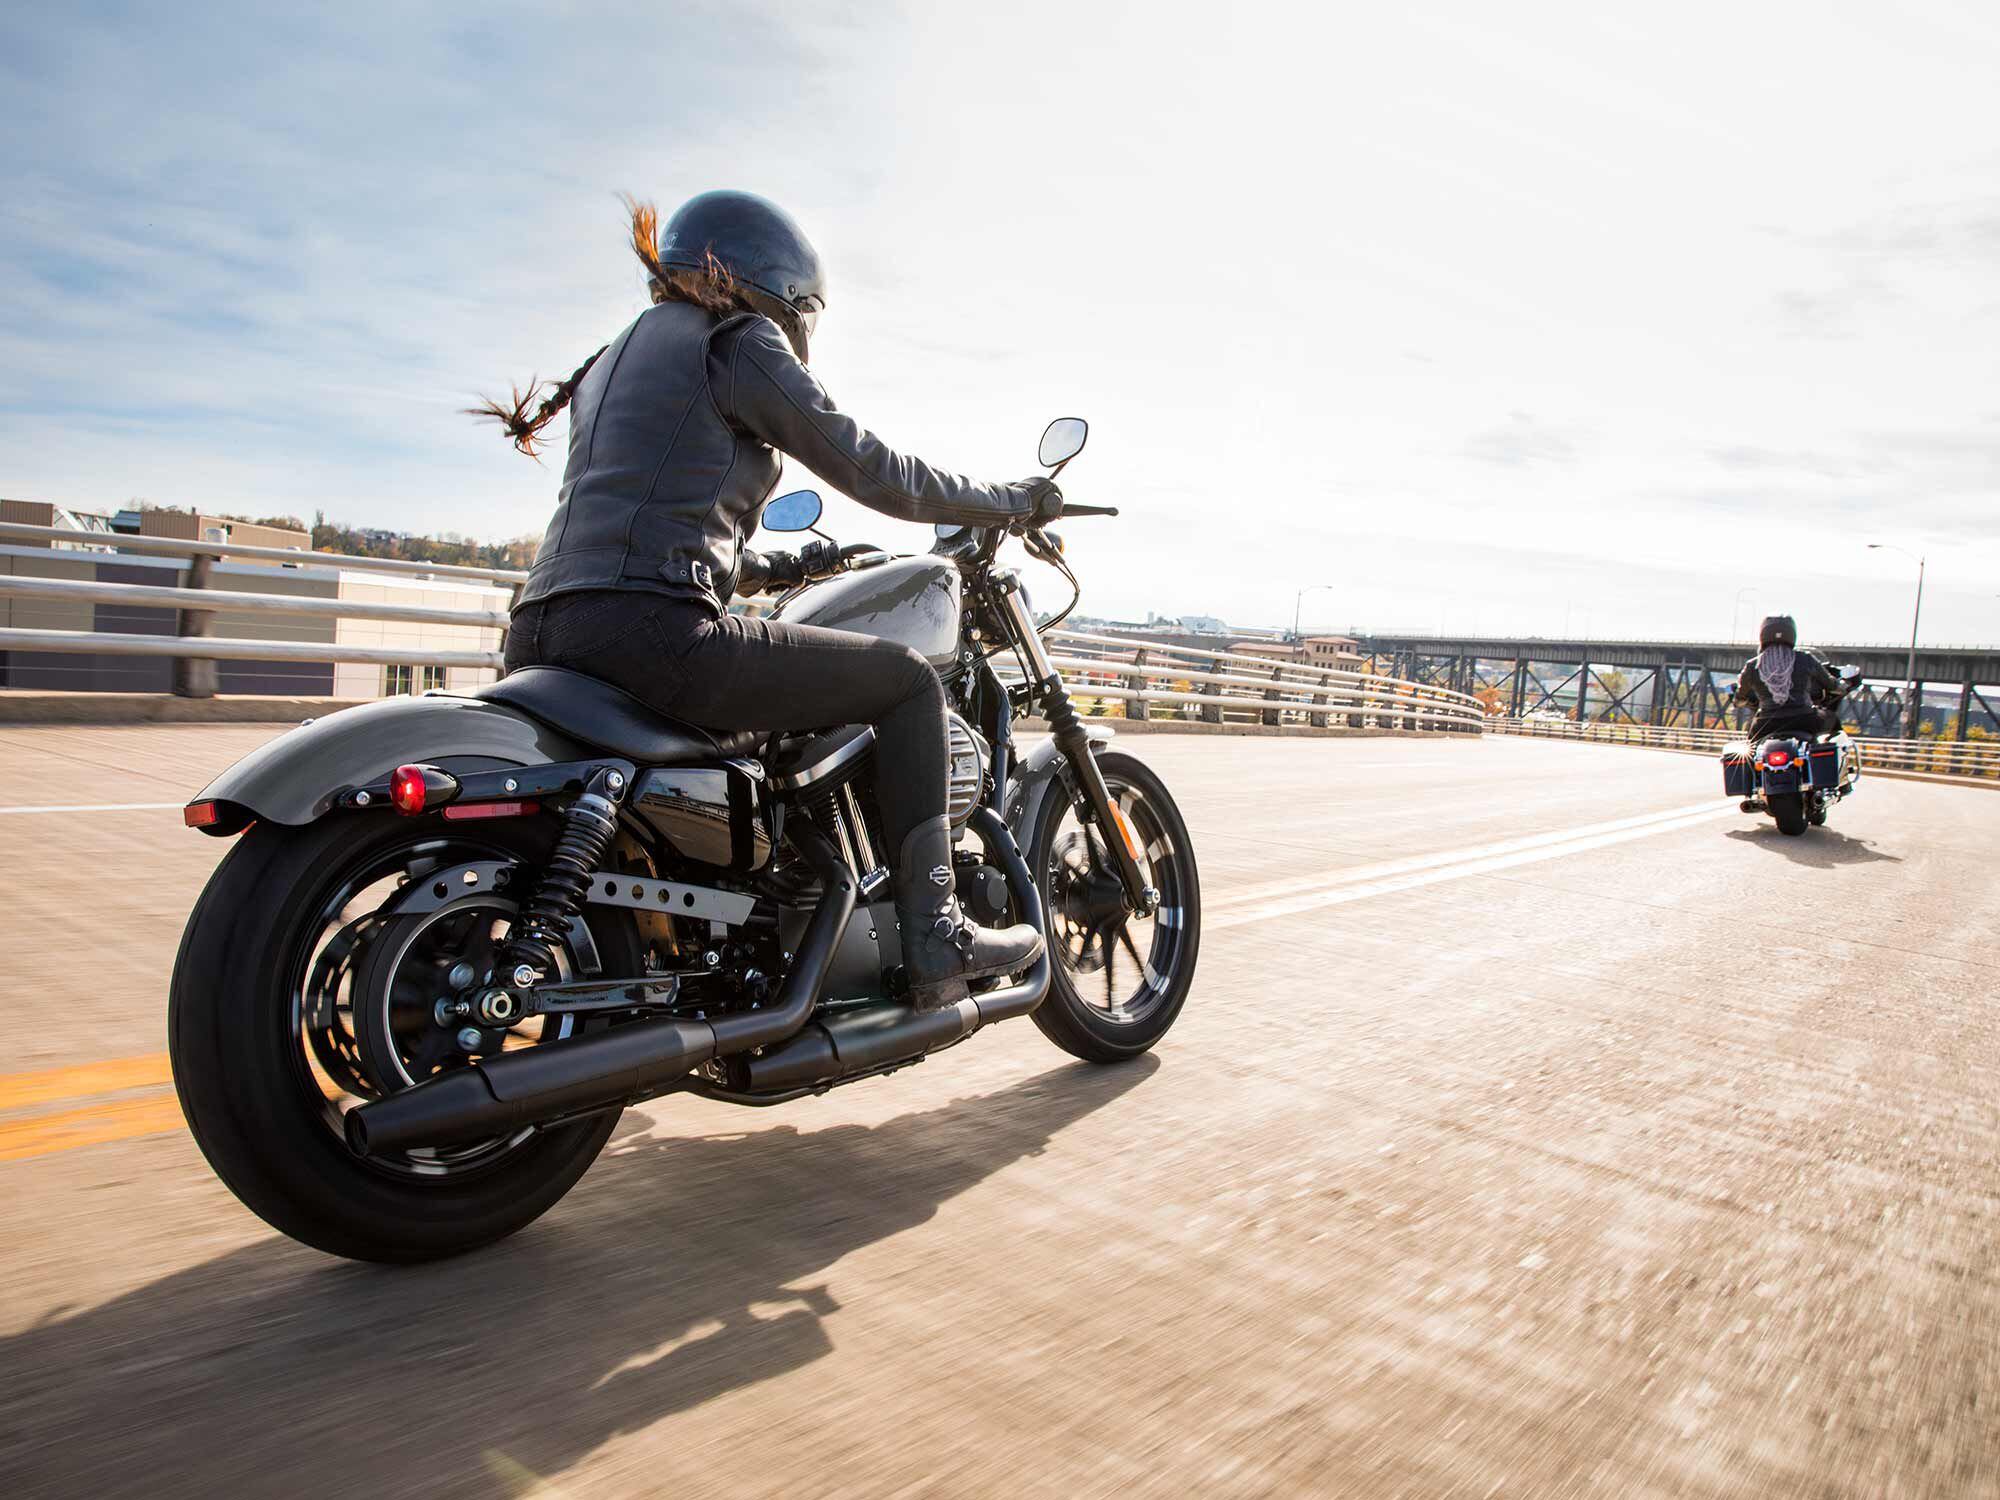 The price tag and approachability of the Iron 883 make it a valid option for riders making their first move to Harley-Davidson.